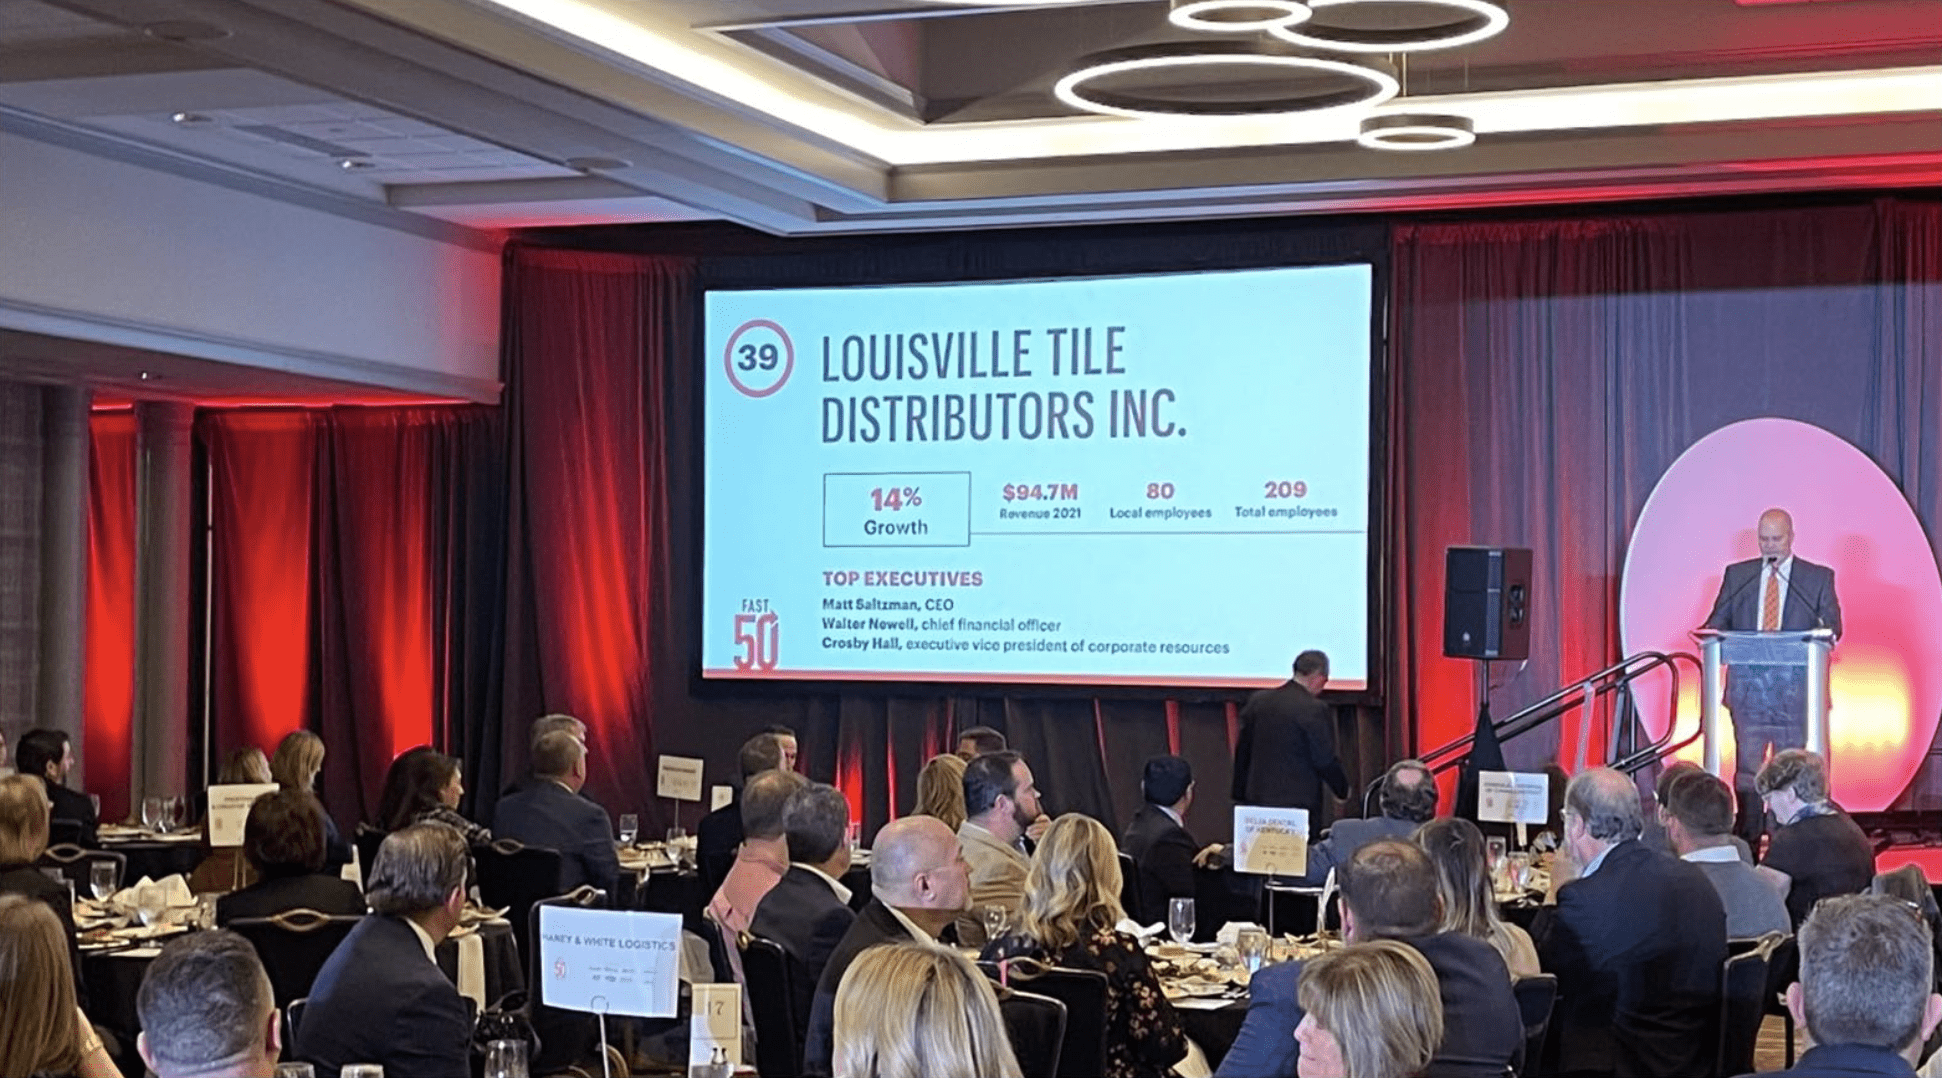 Louisville Tile acquires Mid America Tile - Louisville Business First